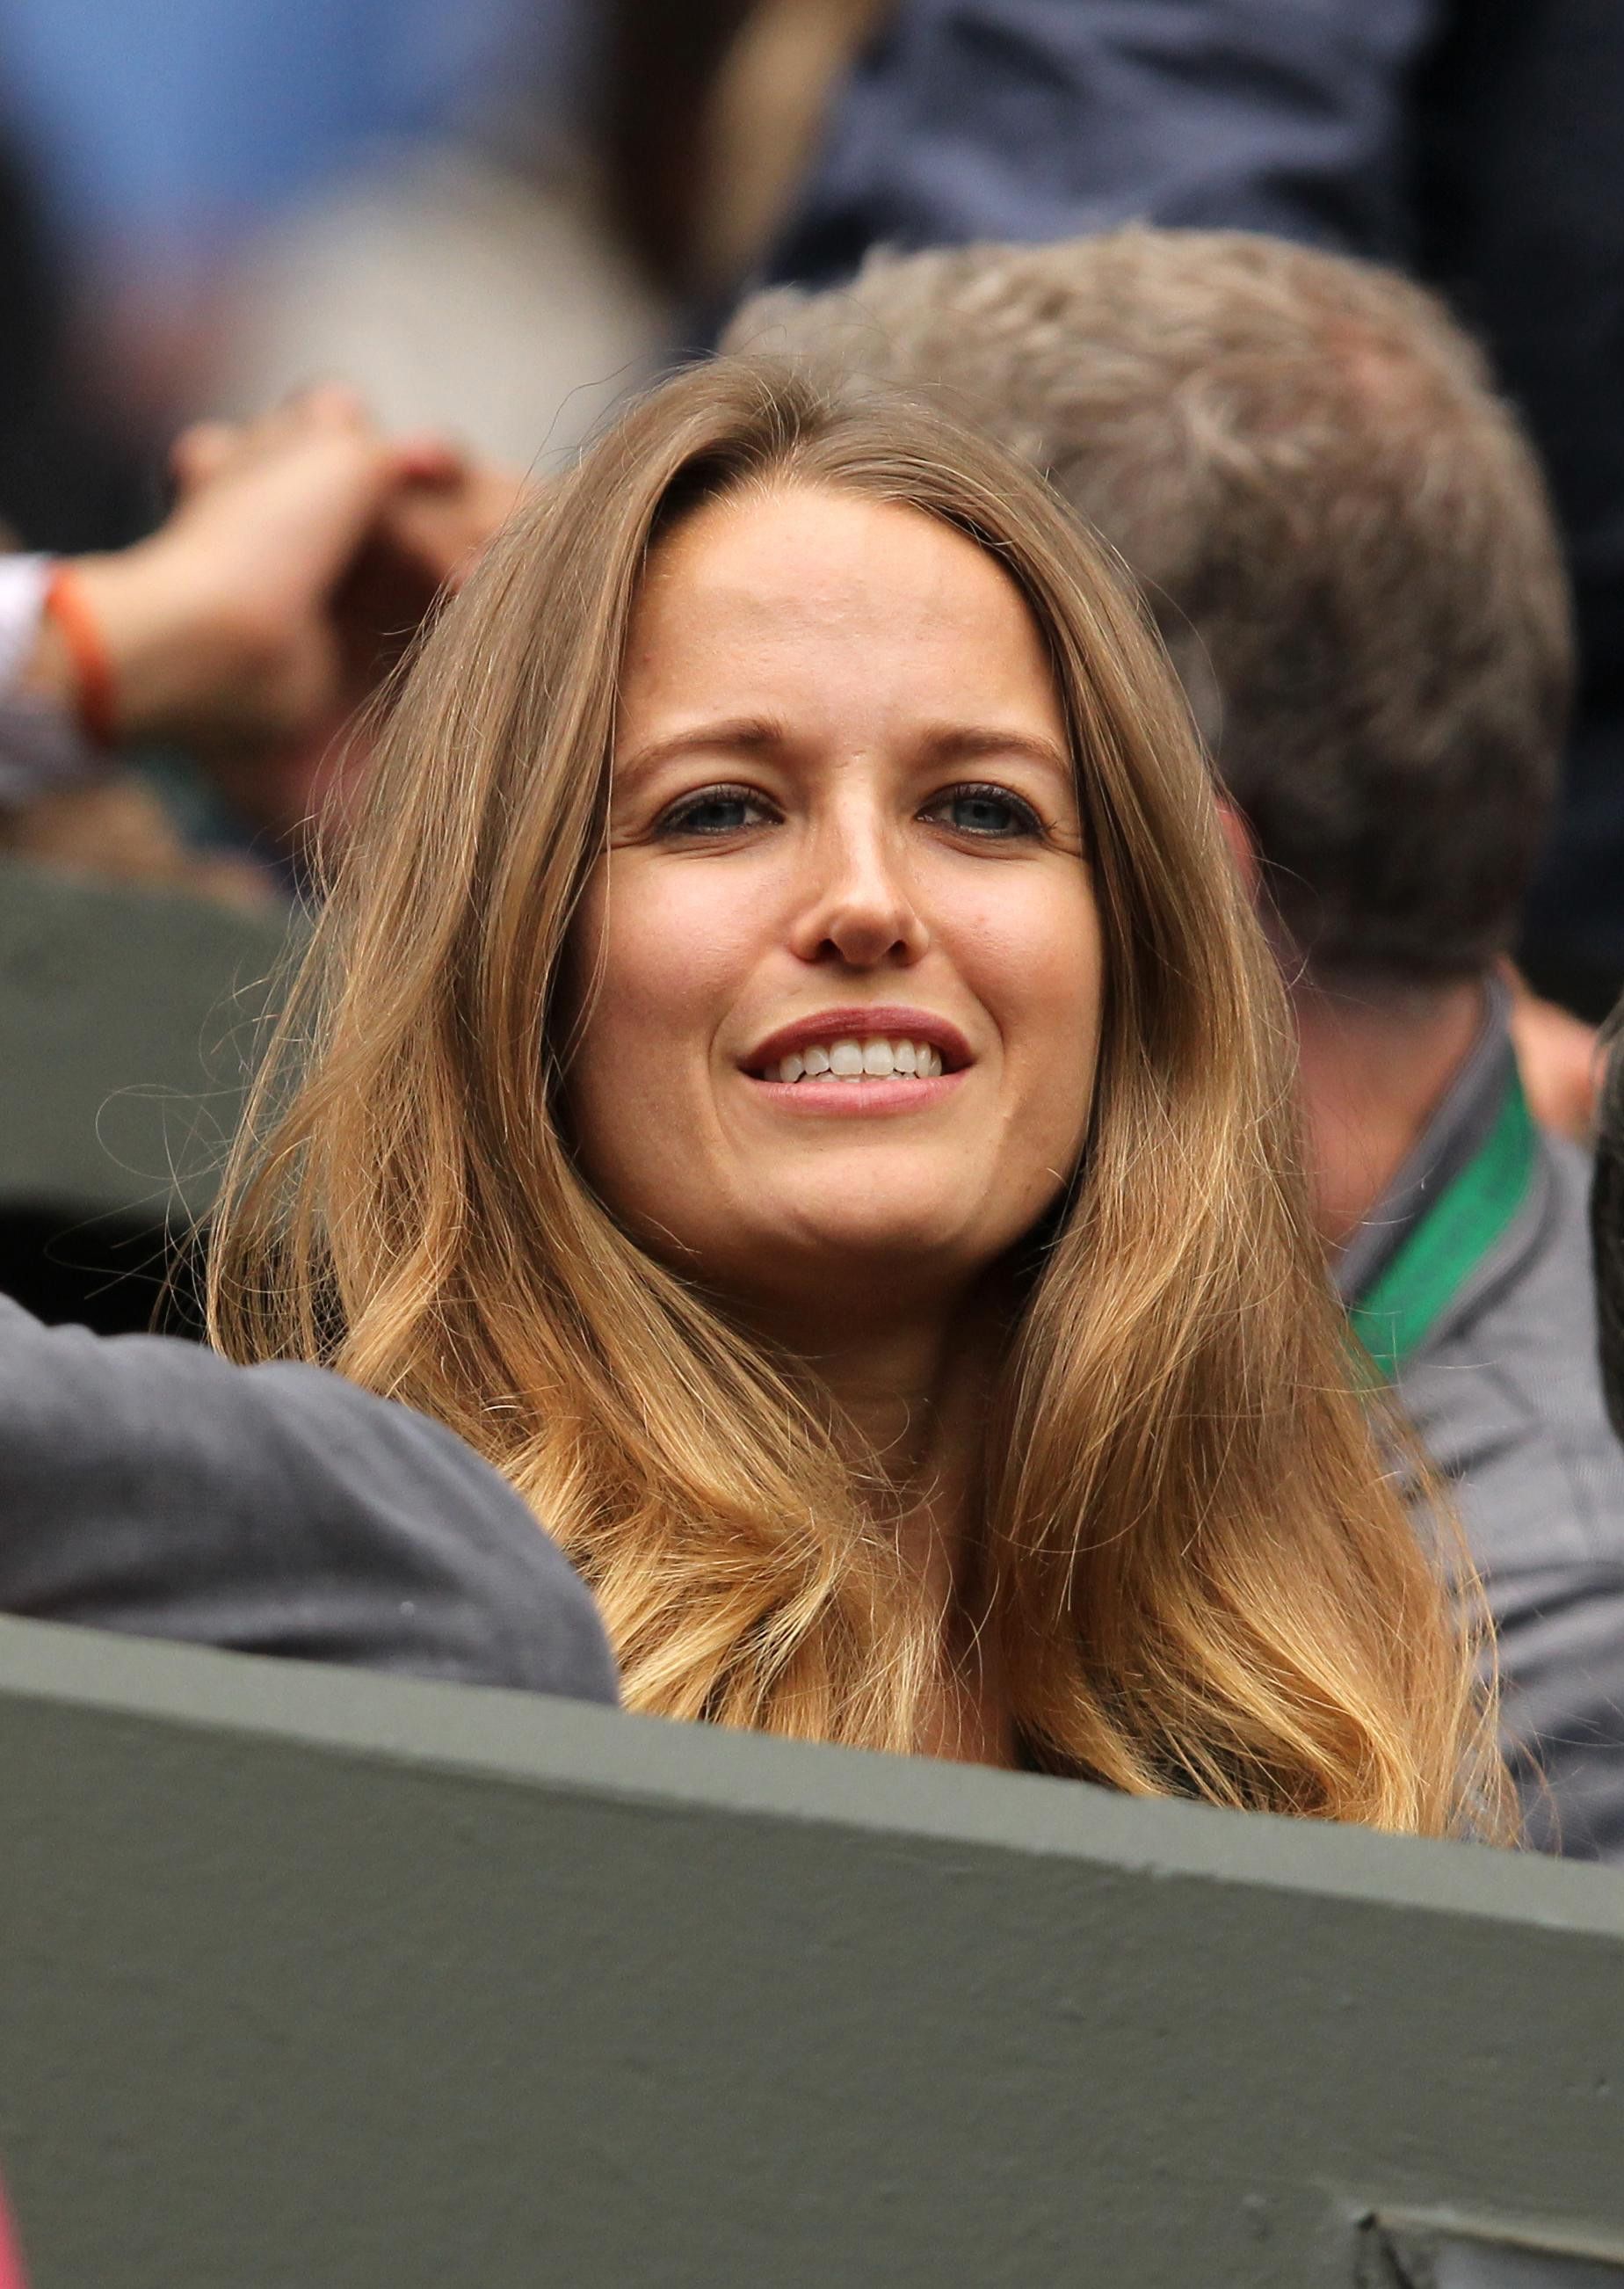 Murray girlfriend left cold by 50 Shades